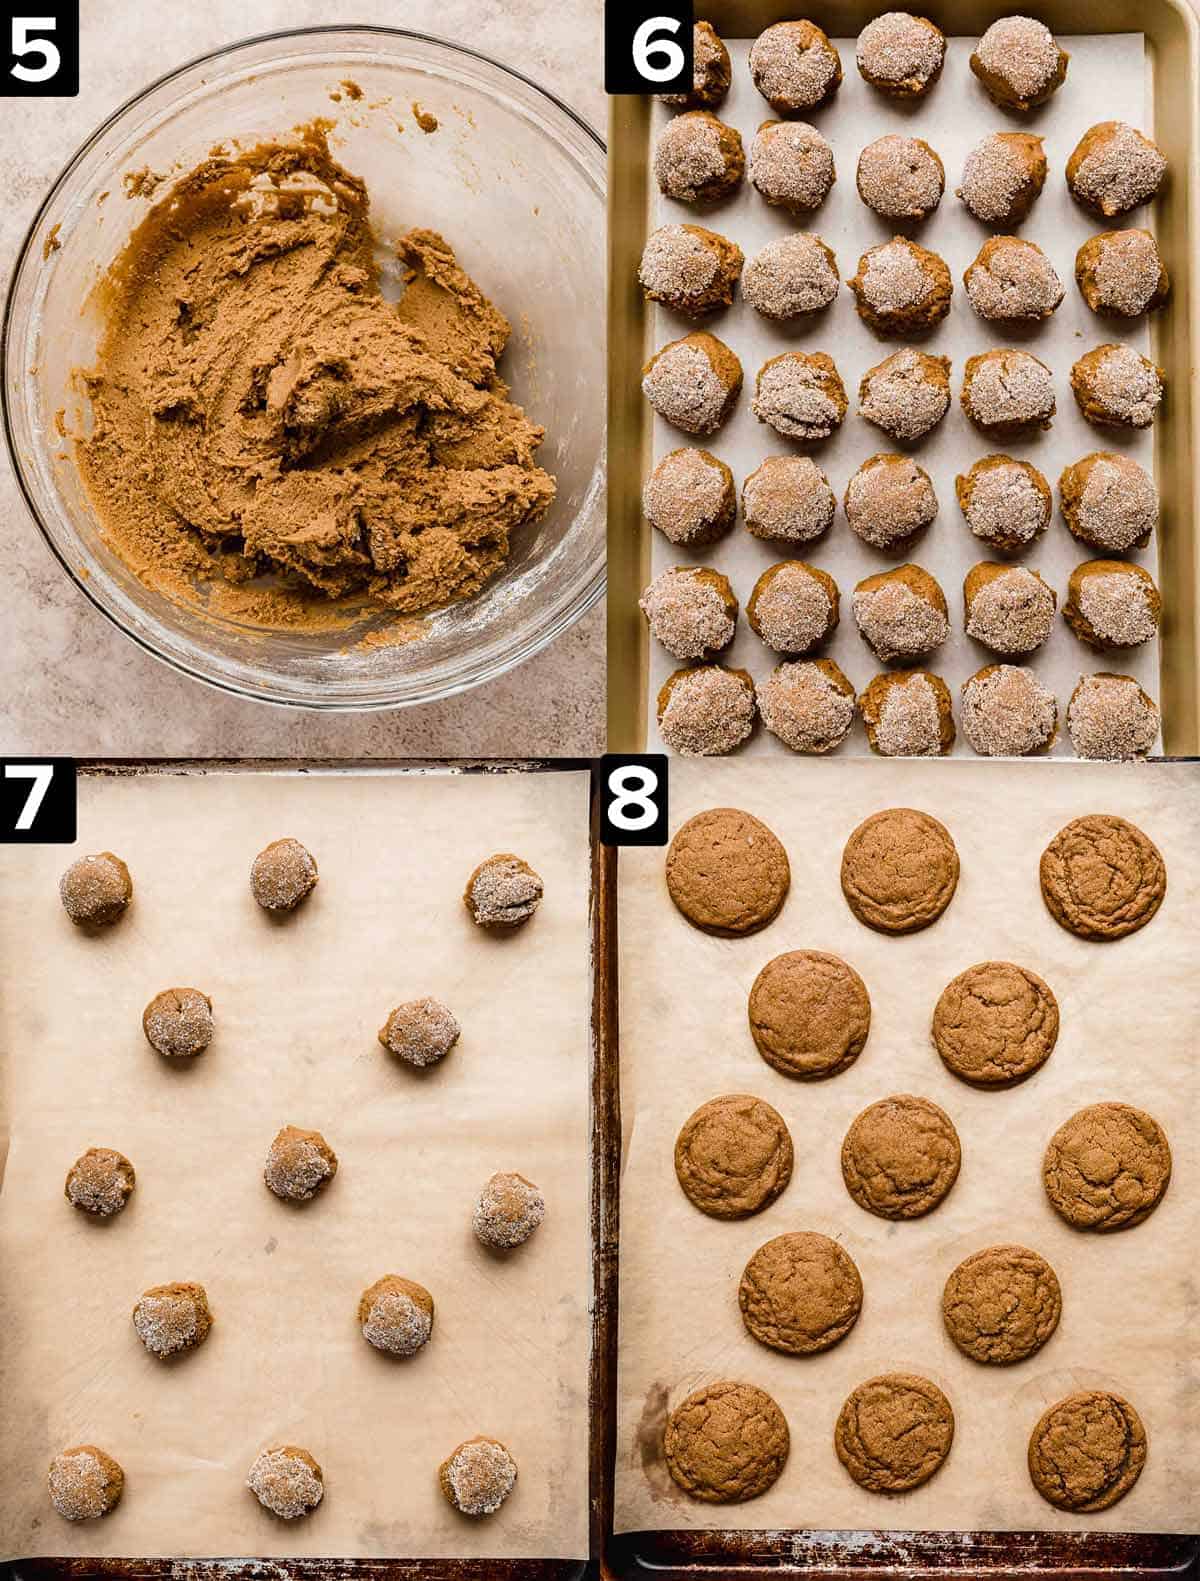 Four images showing how to make gingersnaps: top left has brown gingersnap dough in a glass bowl, top right and bottom left photo is gingersnap cookie dough balls on baking sheet, bottom right photo is baked soft gingersnap cookies on baking sheet.